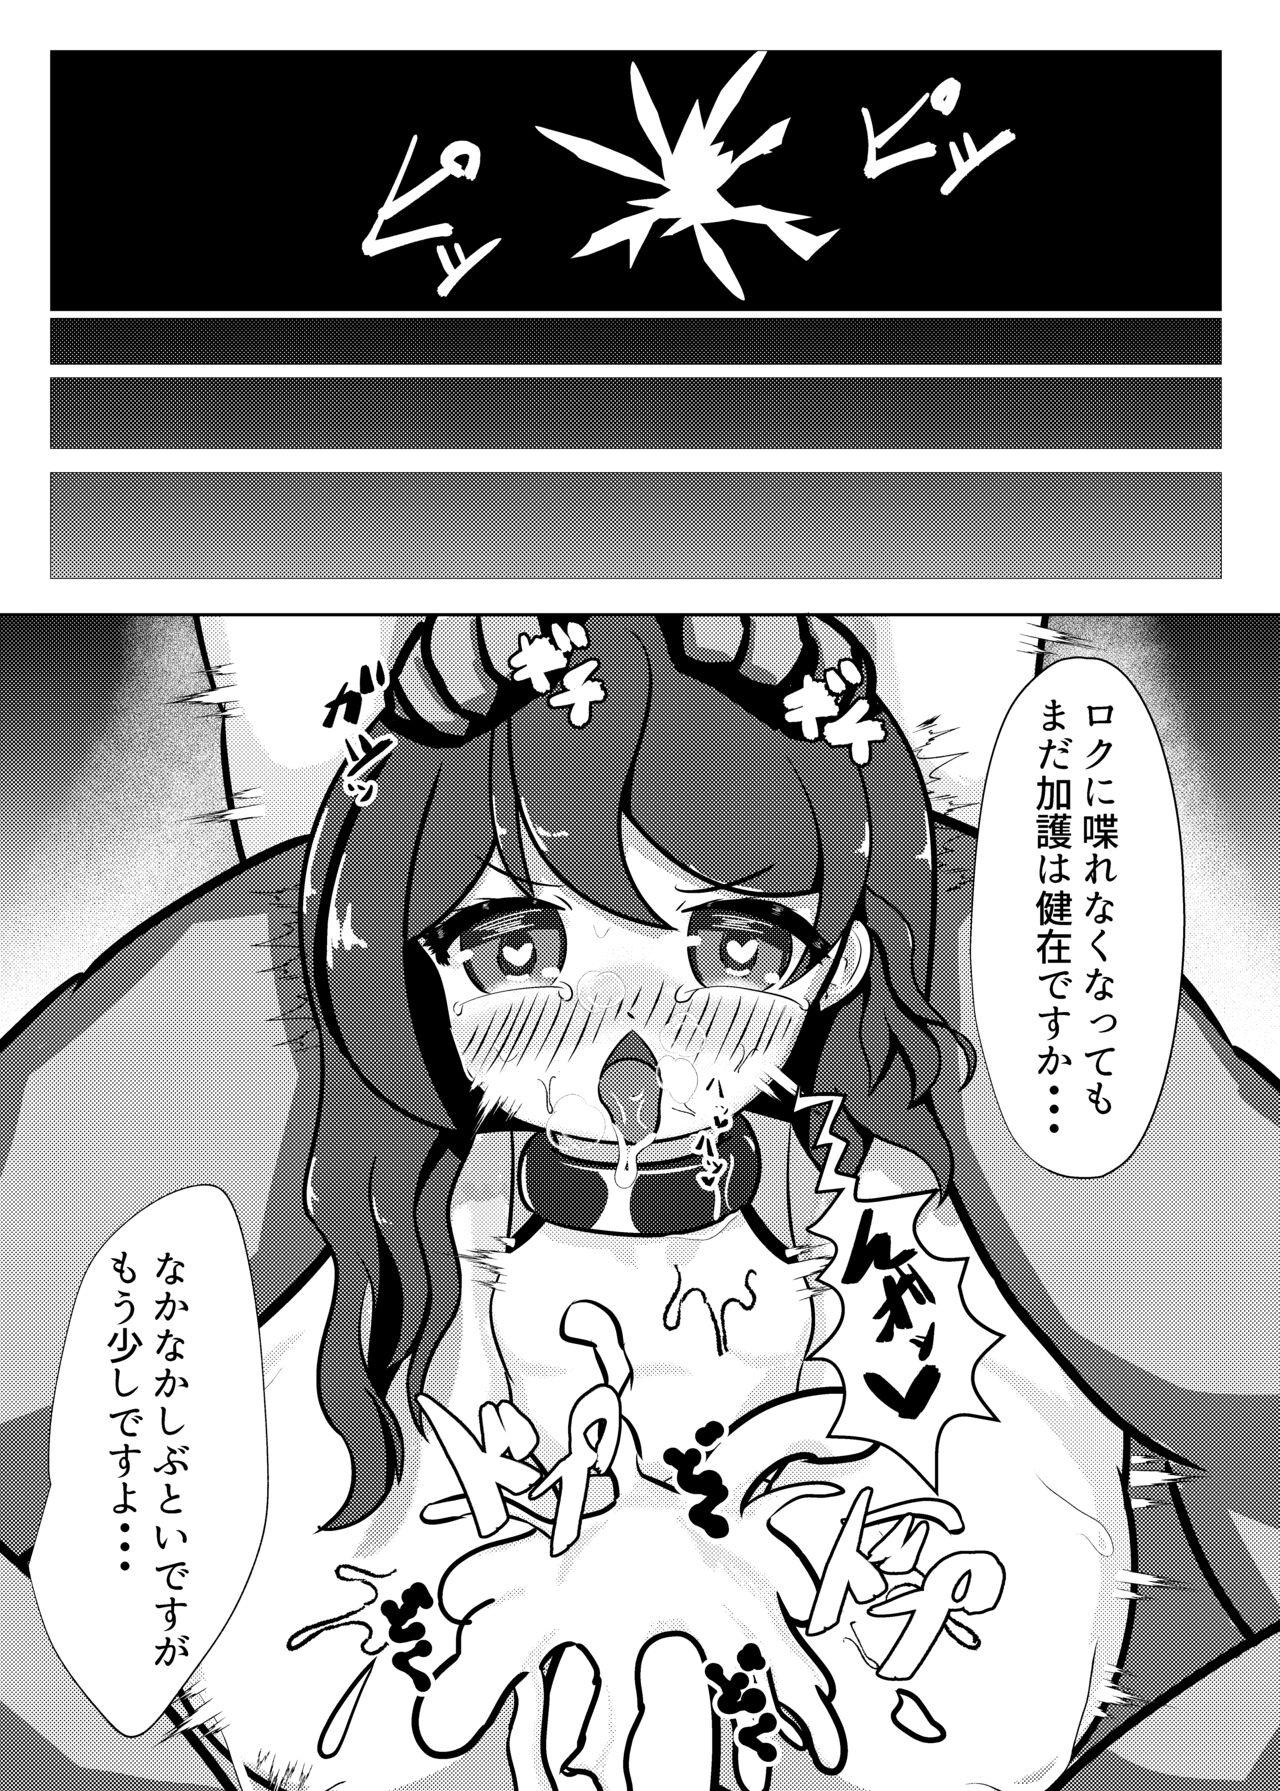 Extreme ヒギリちゃんがひどいめにあう本 蟲教強制改宗悪堕ち編 - Flower knight girl Tongue - Page 11